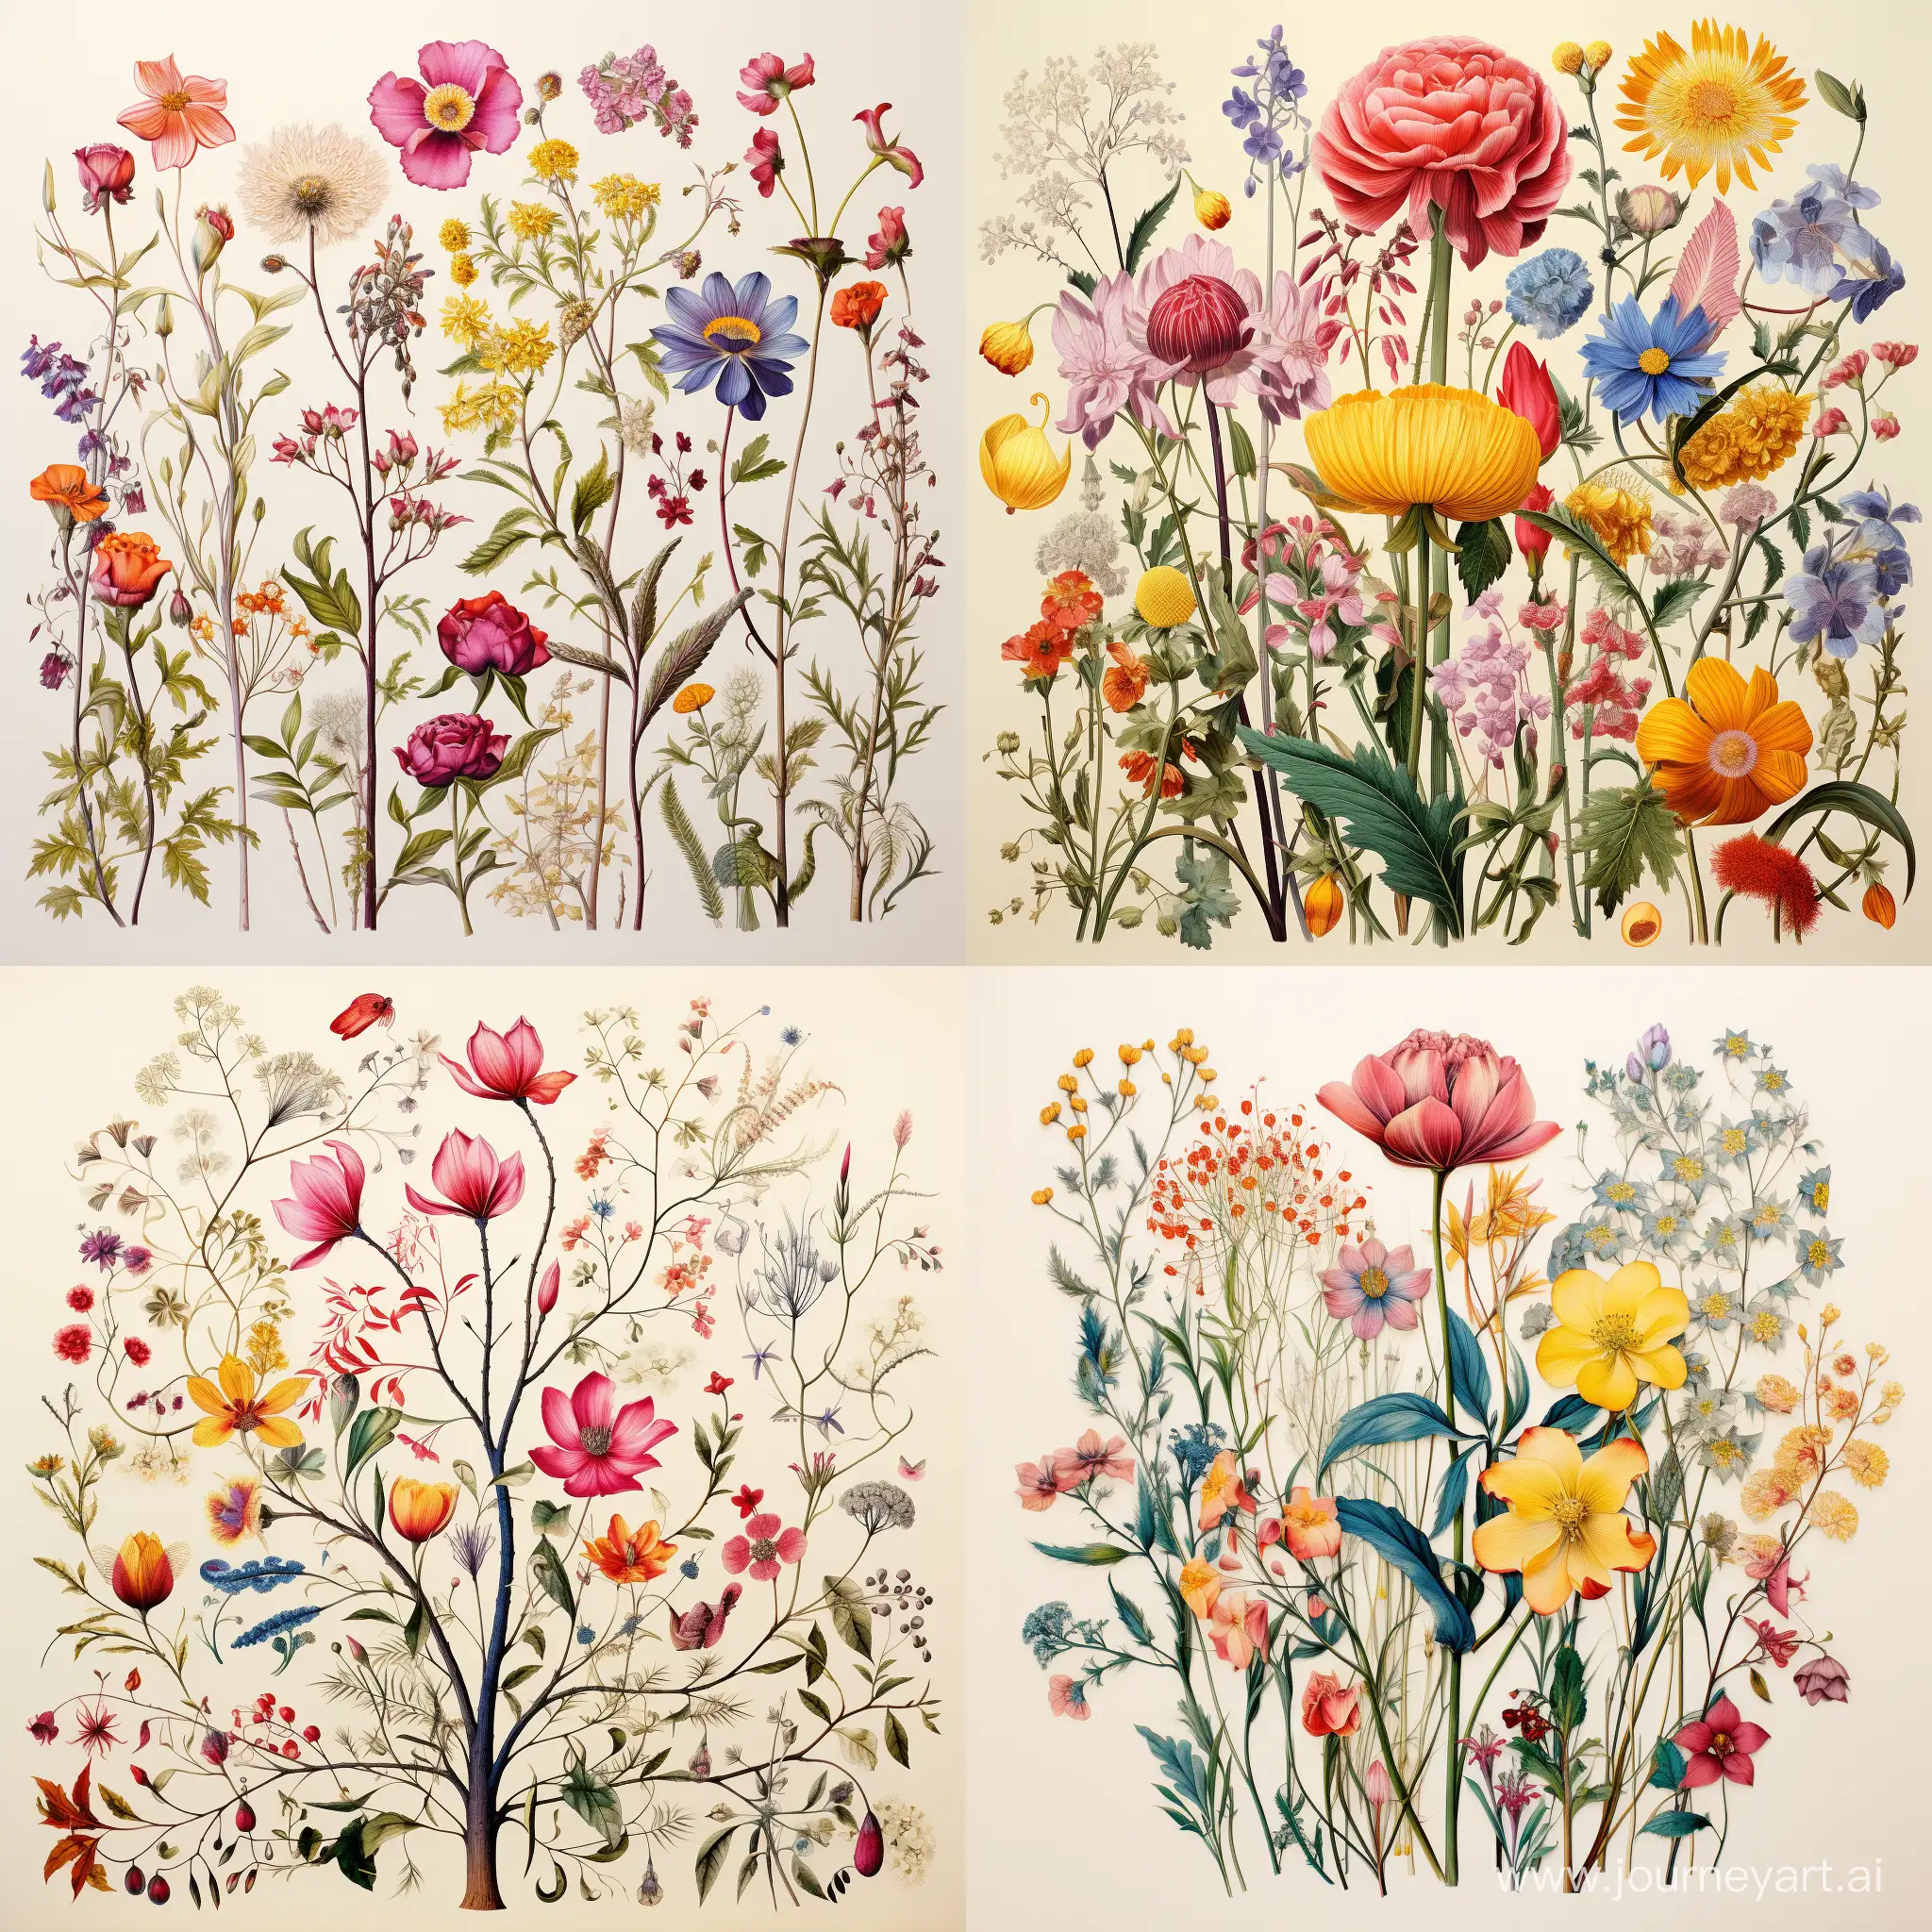 botanical illustrations of flowers and trees